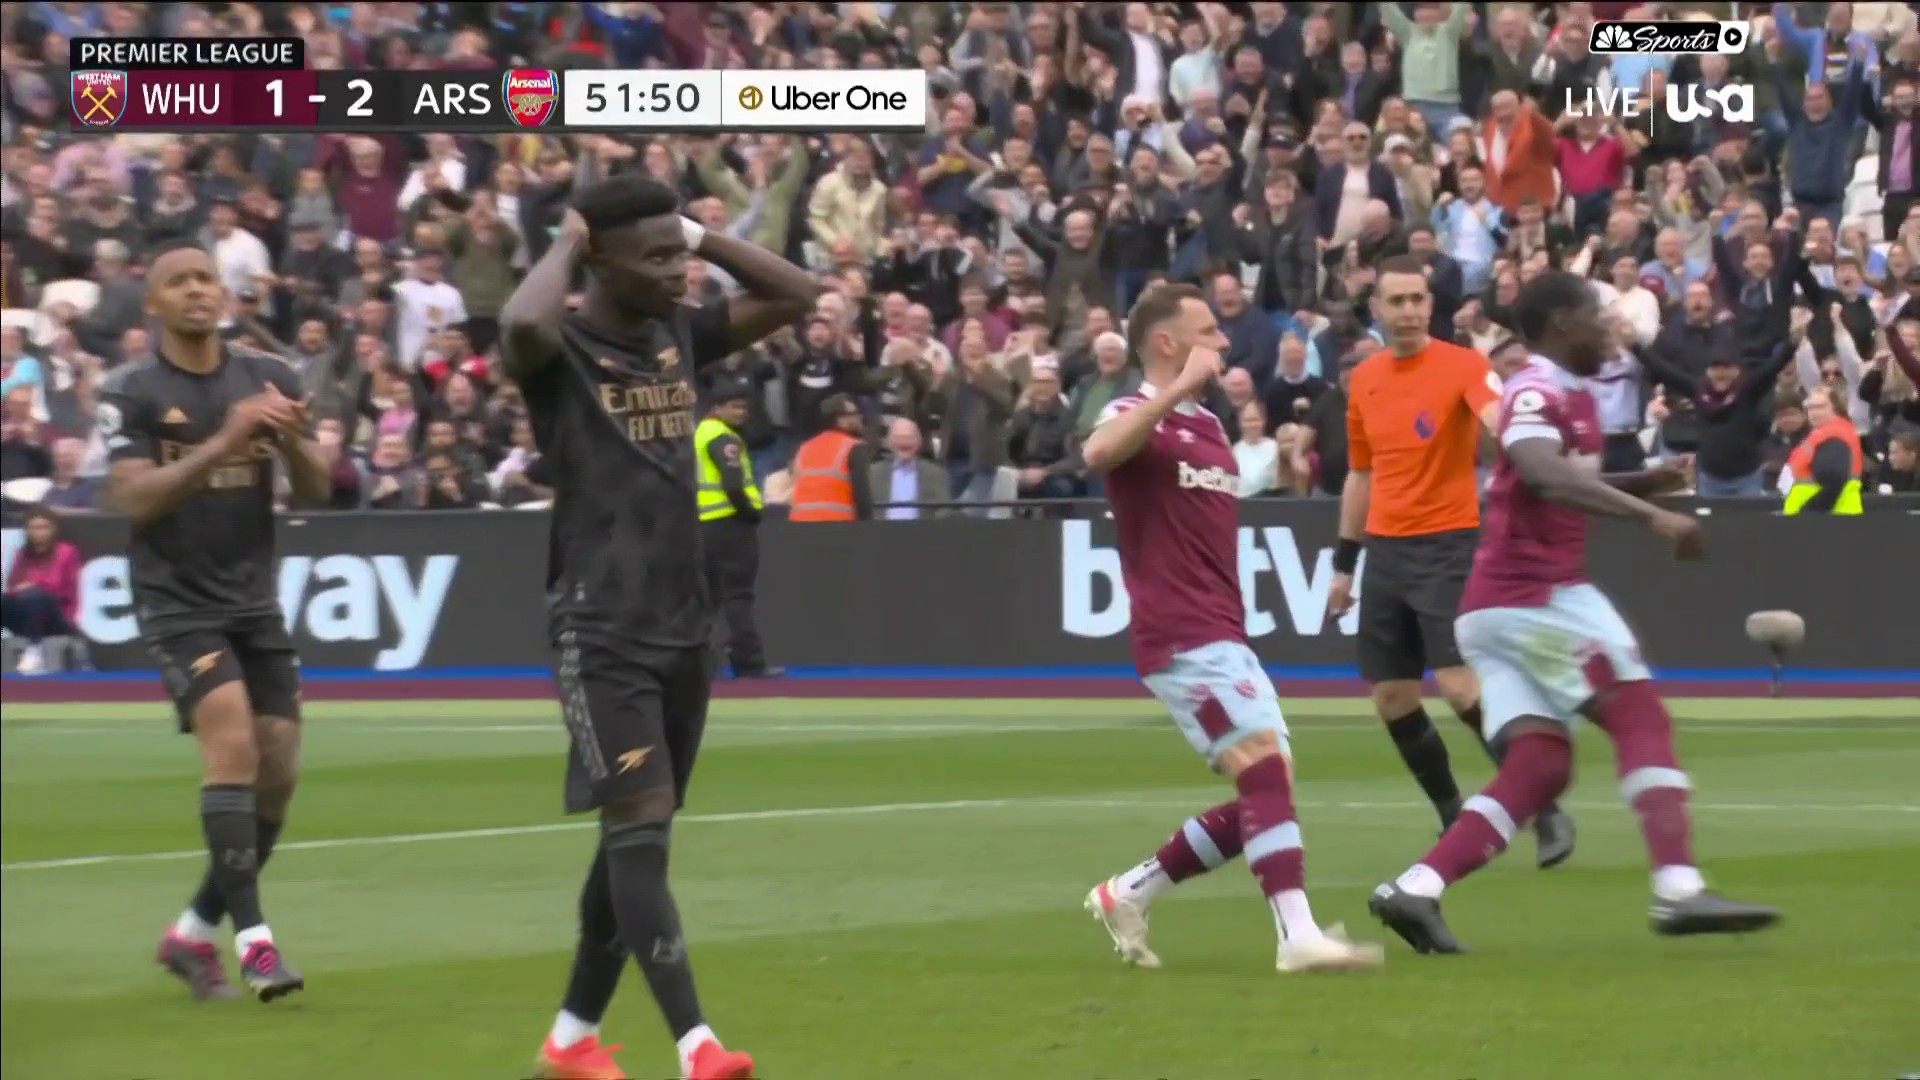 Bukayo.Saka misses his penalty!

Can West Ham find the equalizer?
📺: @USANetwork | #WHUARS”